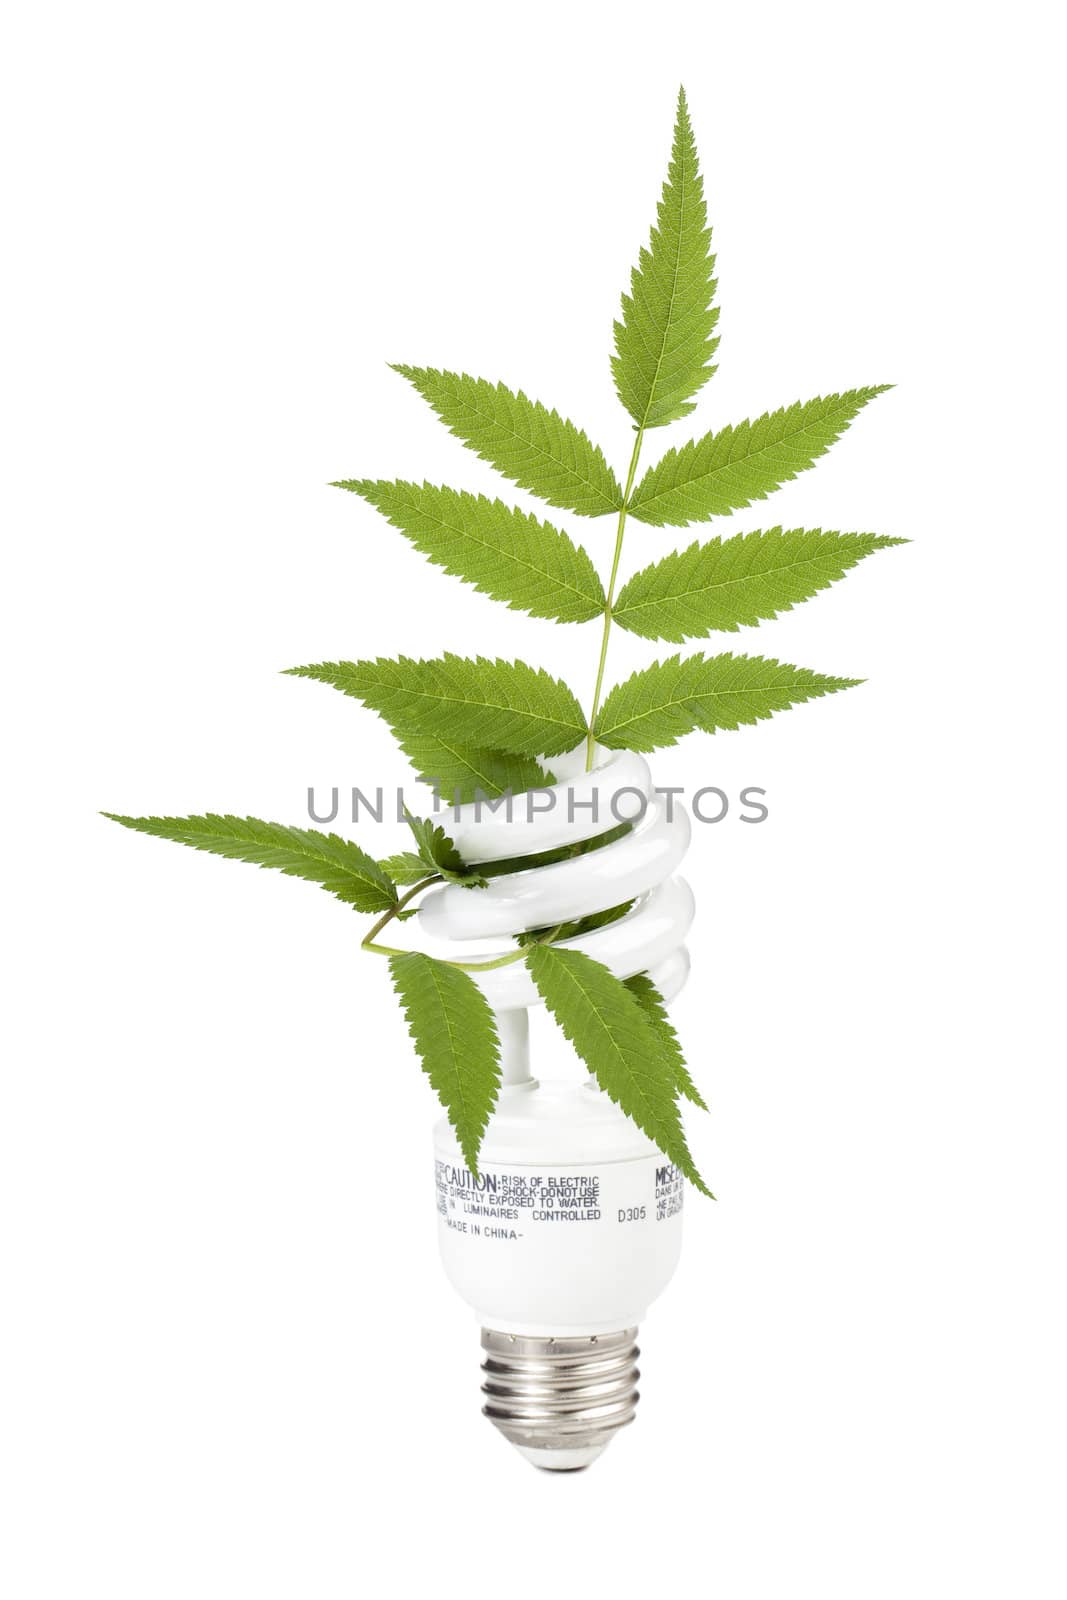 Close up image of eco concept light bulb with leaf against white background